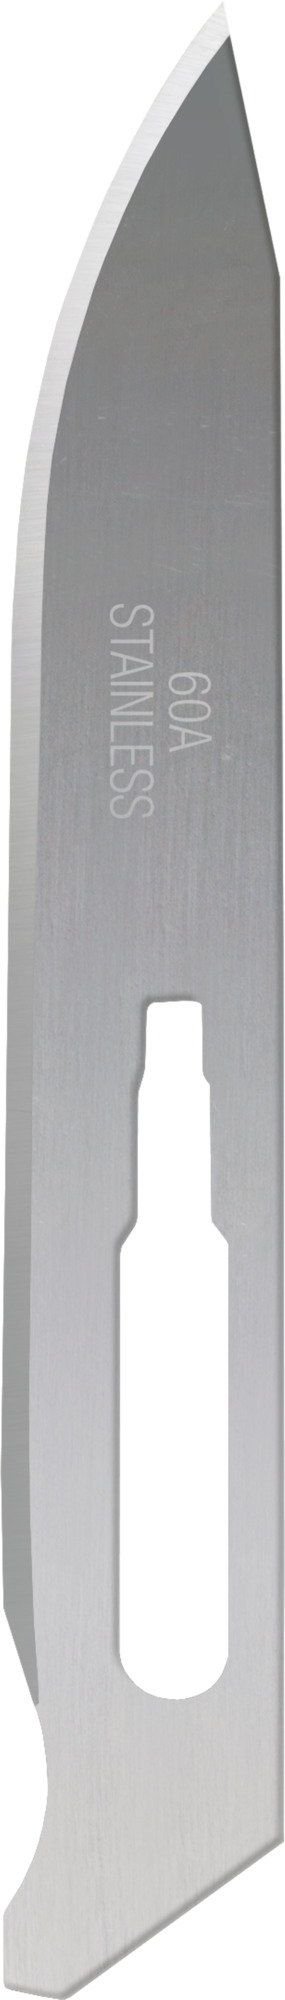 Havalon SSC60ADZ 12 #60A Stainless Steel Replacement Blades